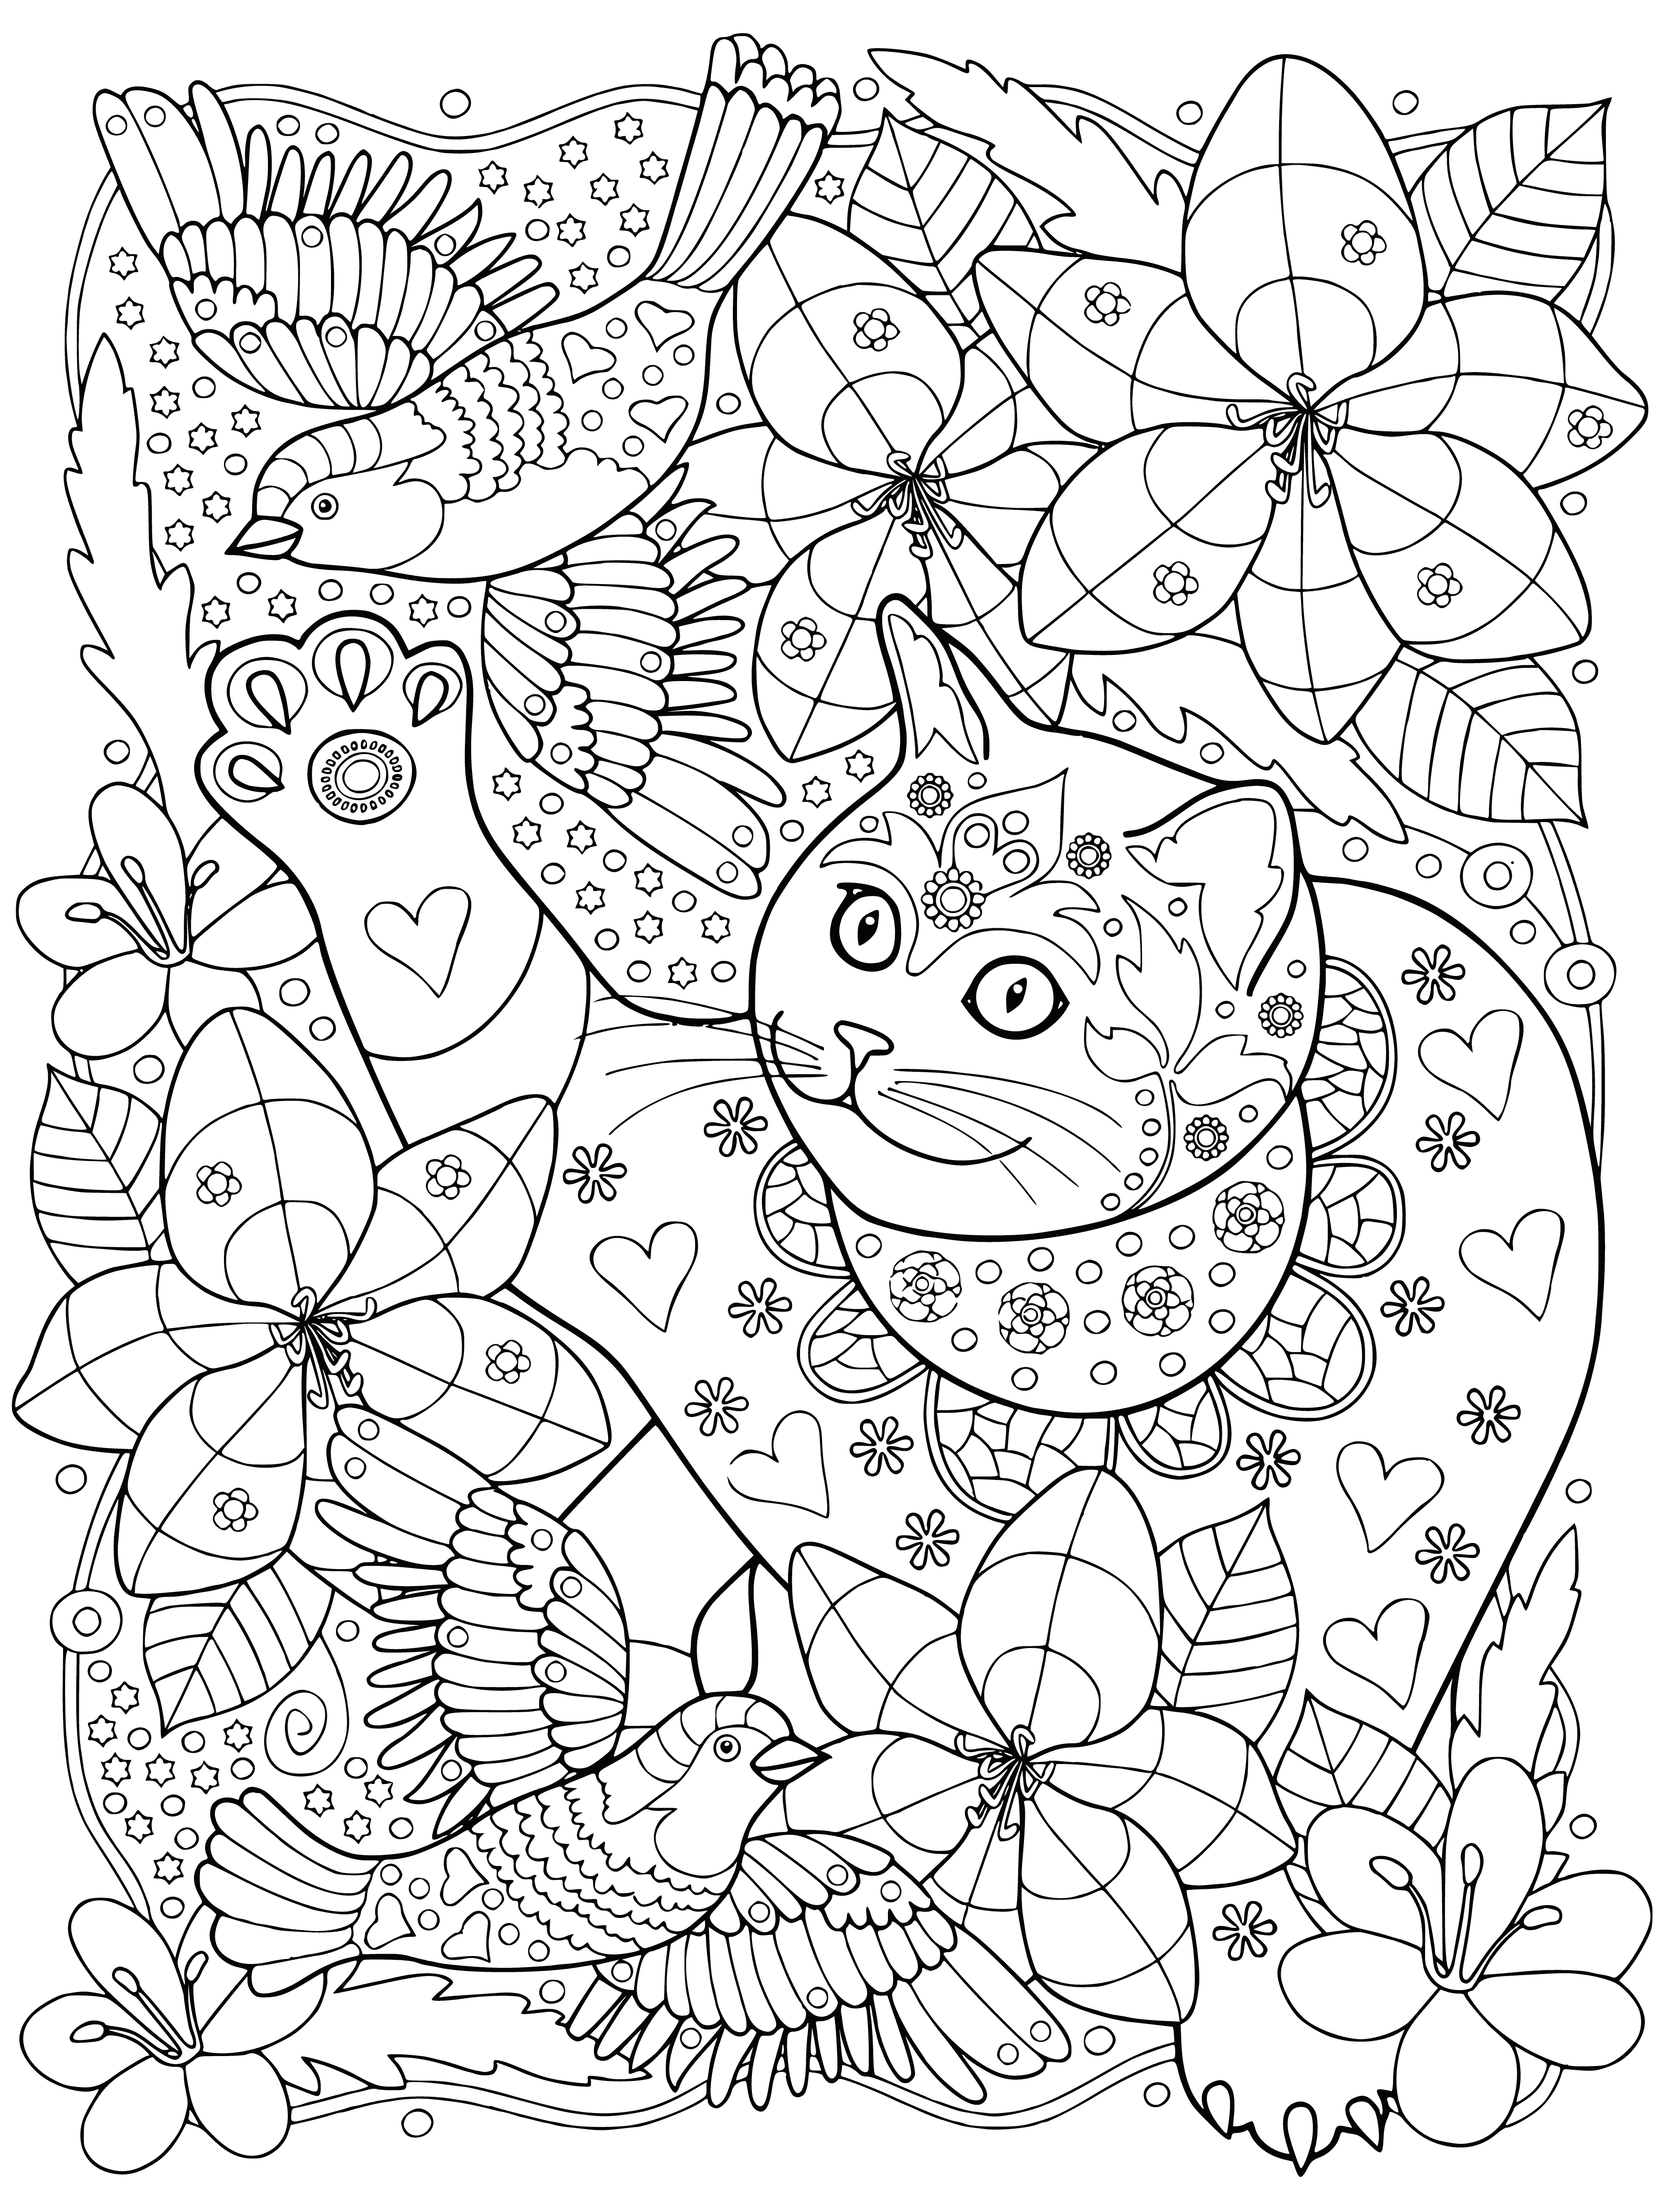 coloring page: Cat curiously watches birds, mesmerized by their movements.